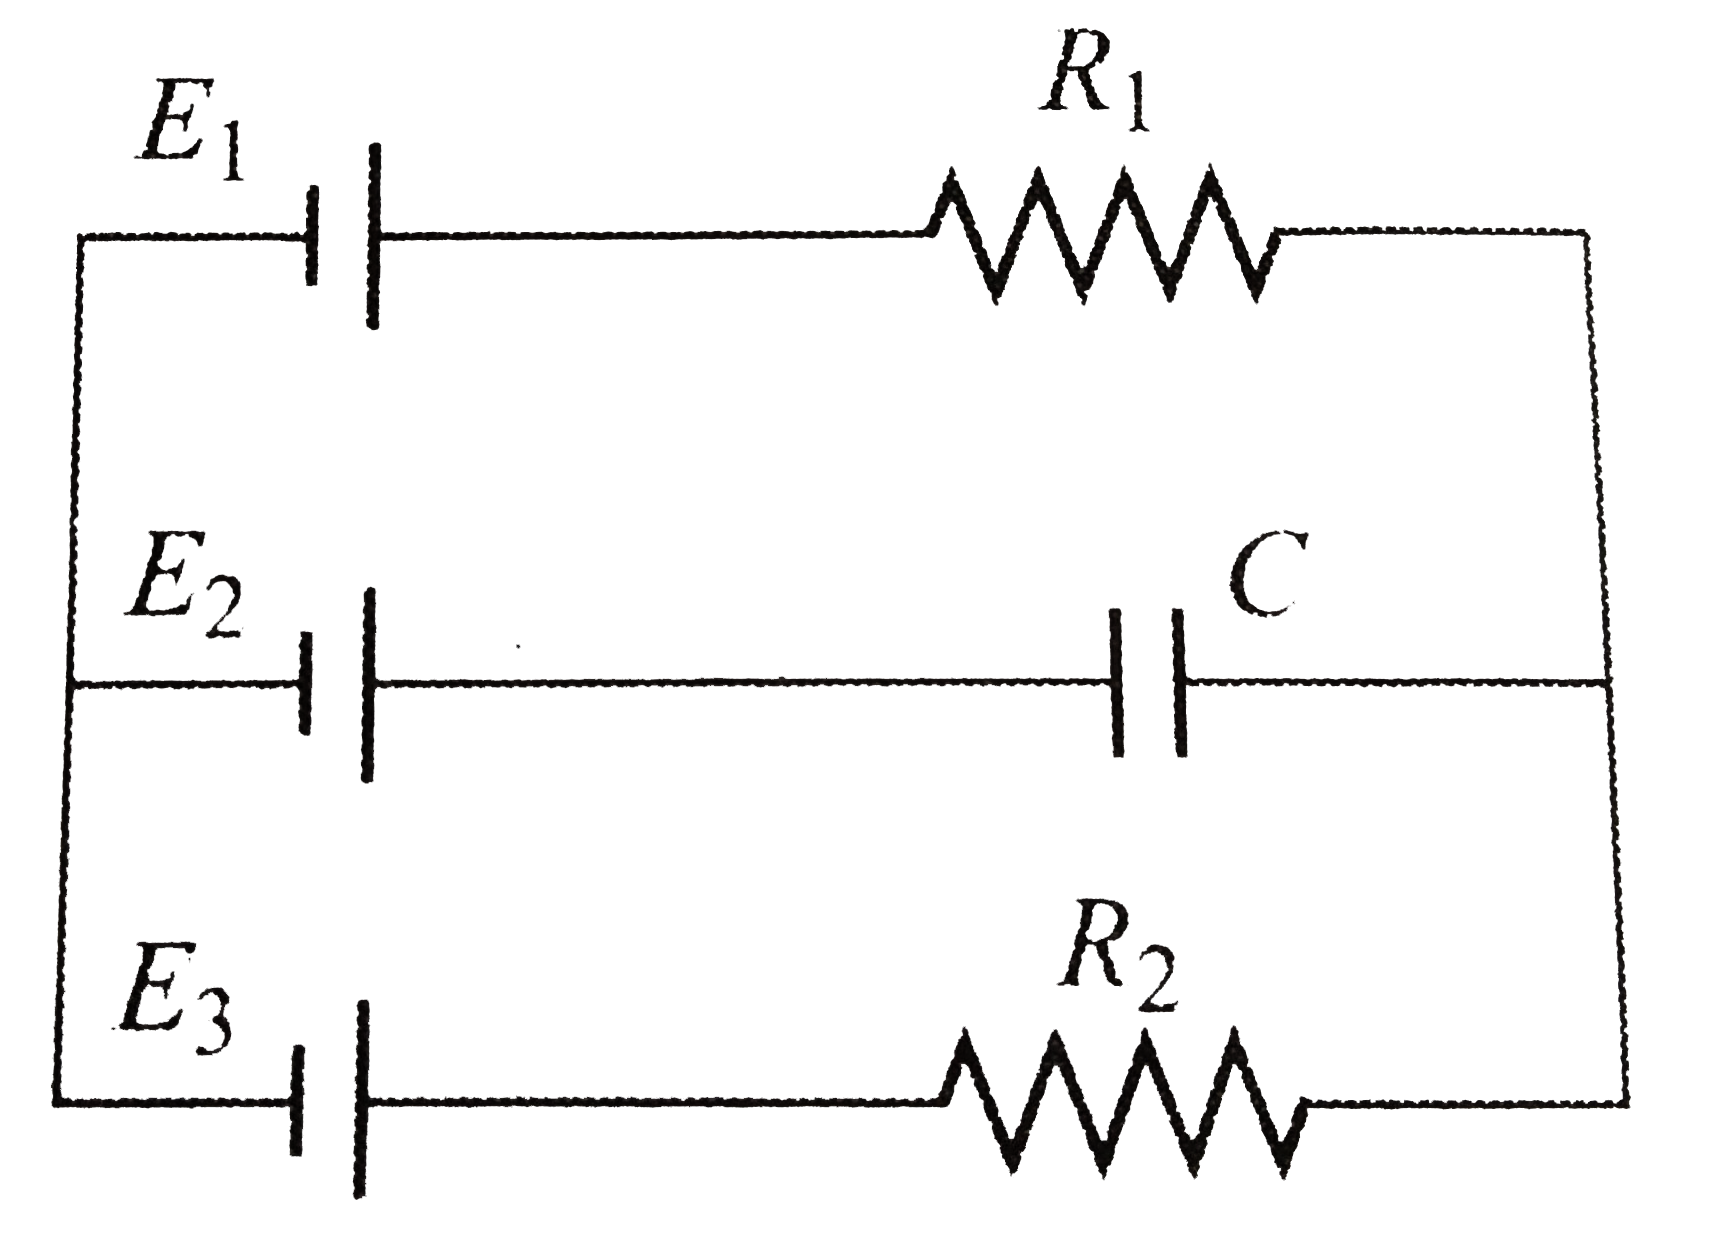 In the circuit shown , the batteries have emf E1 = E2= 1V , E3 = 2.5 V, and the resistance R1 = 10Omega, R2 = 20 Omega, Capacitance C = 10 muF. The charge on the left plate of the charge on the left plate of the capacitor C at steady state is